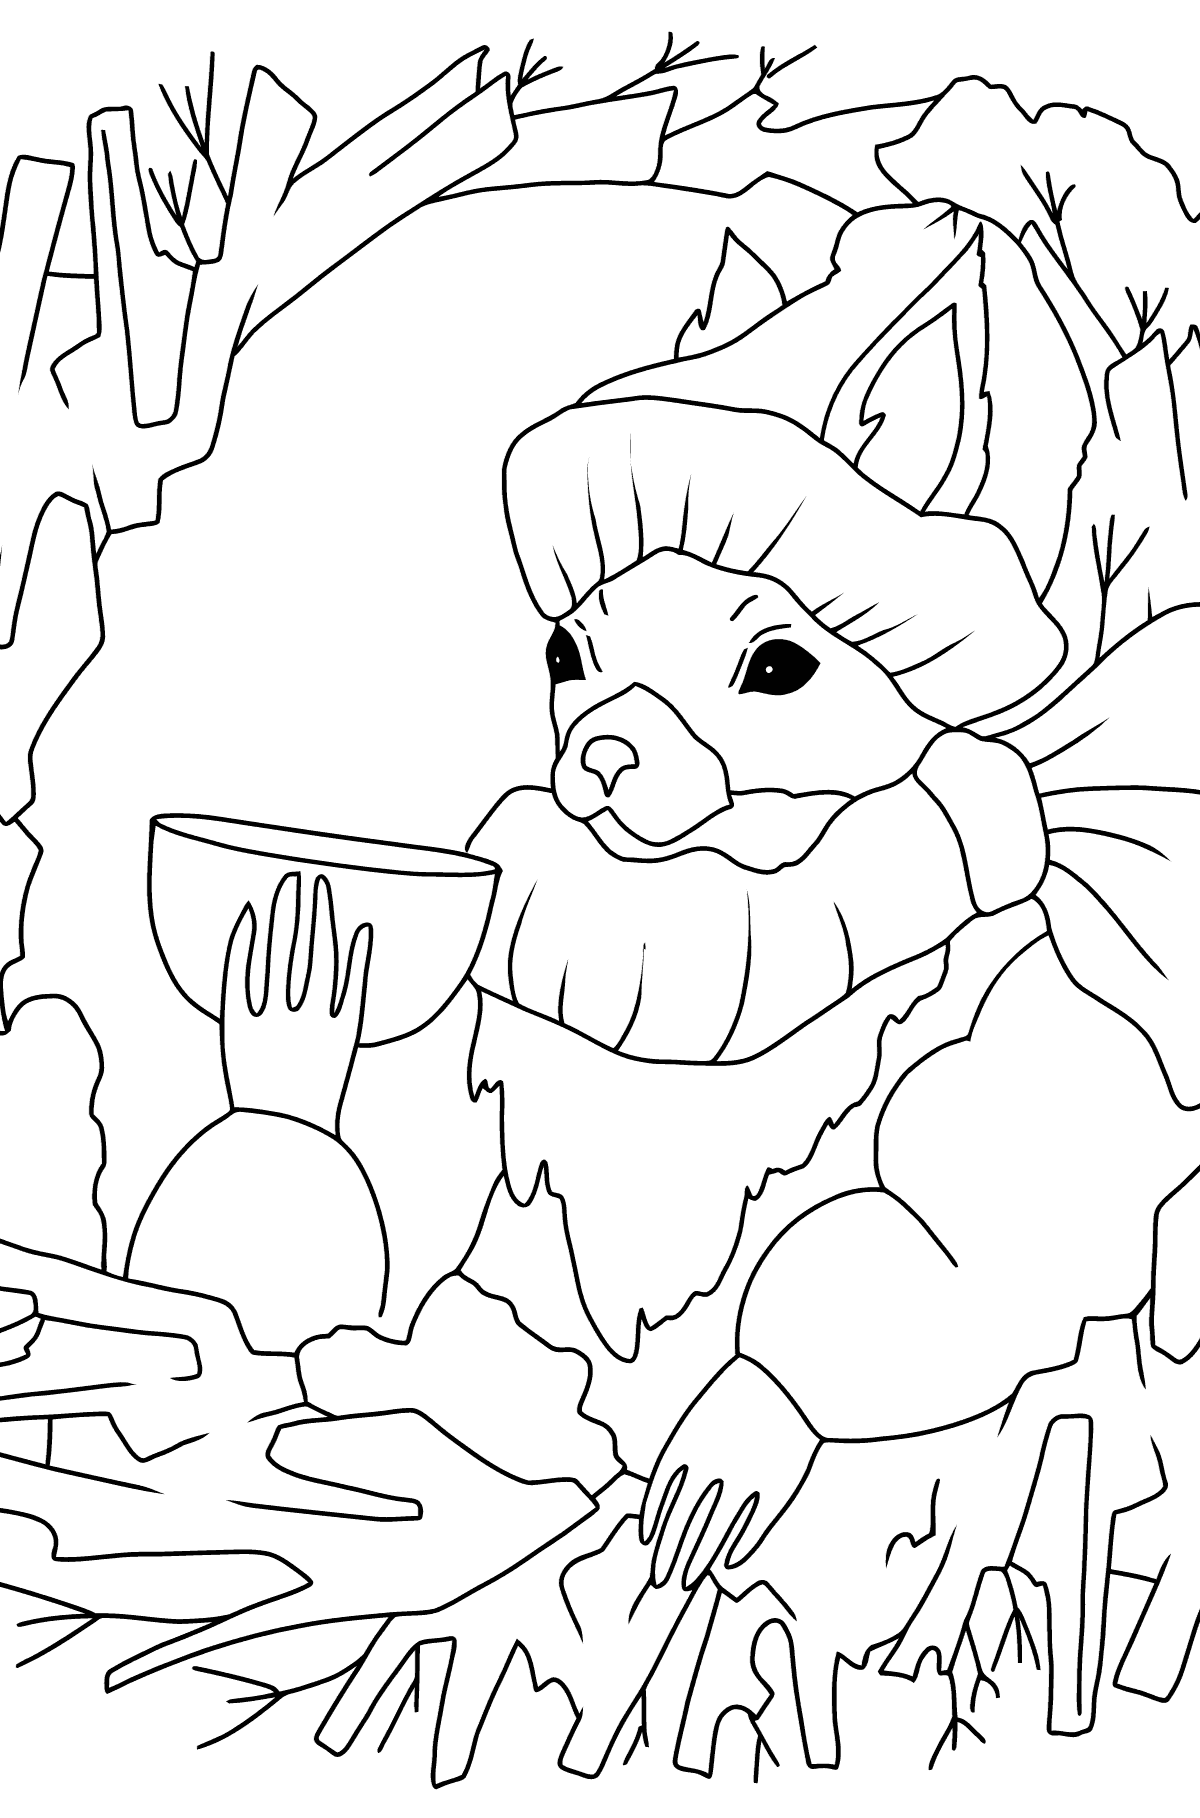 Squirrel coloring page for Toddlers - Coloring Pages for Kids